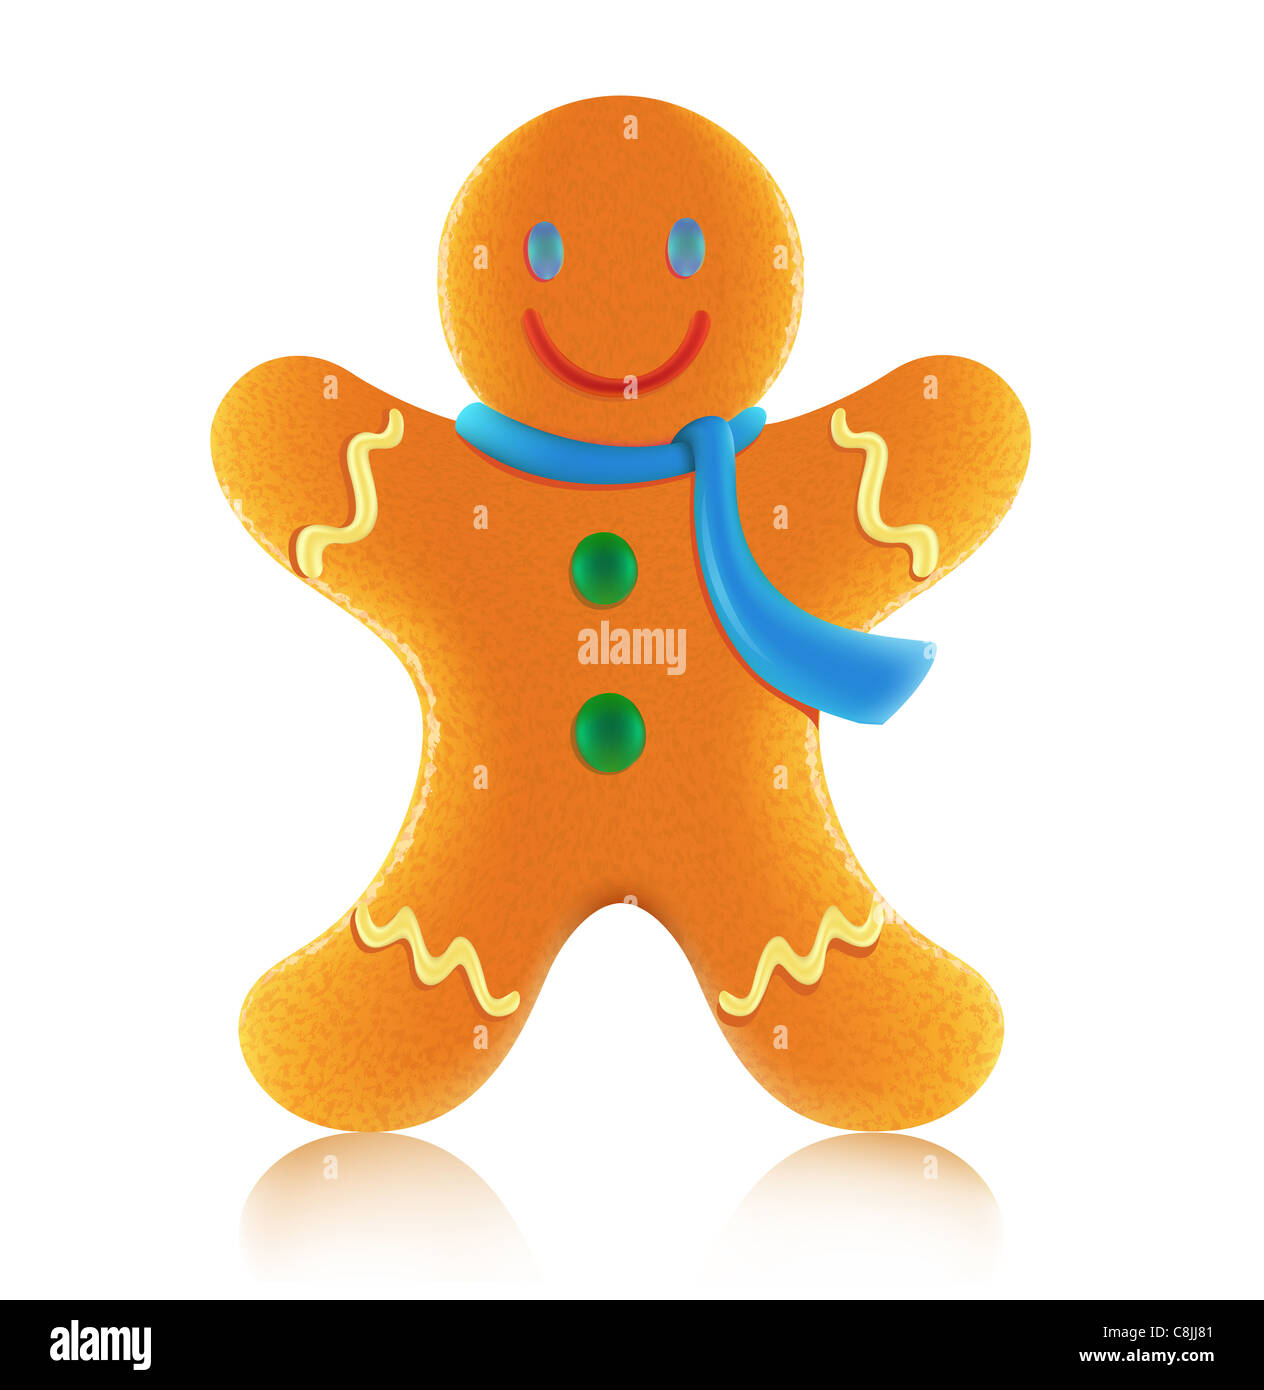 illustration of classic christmas gingerbread man cookie Stock Photo